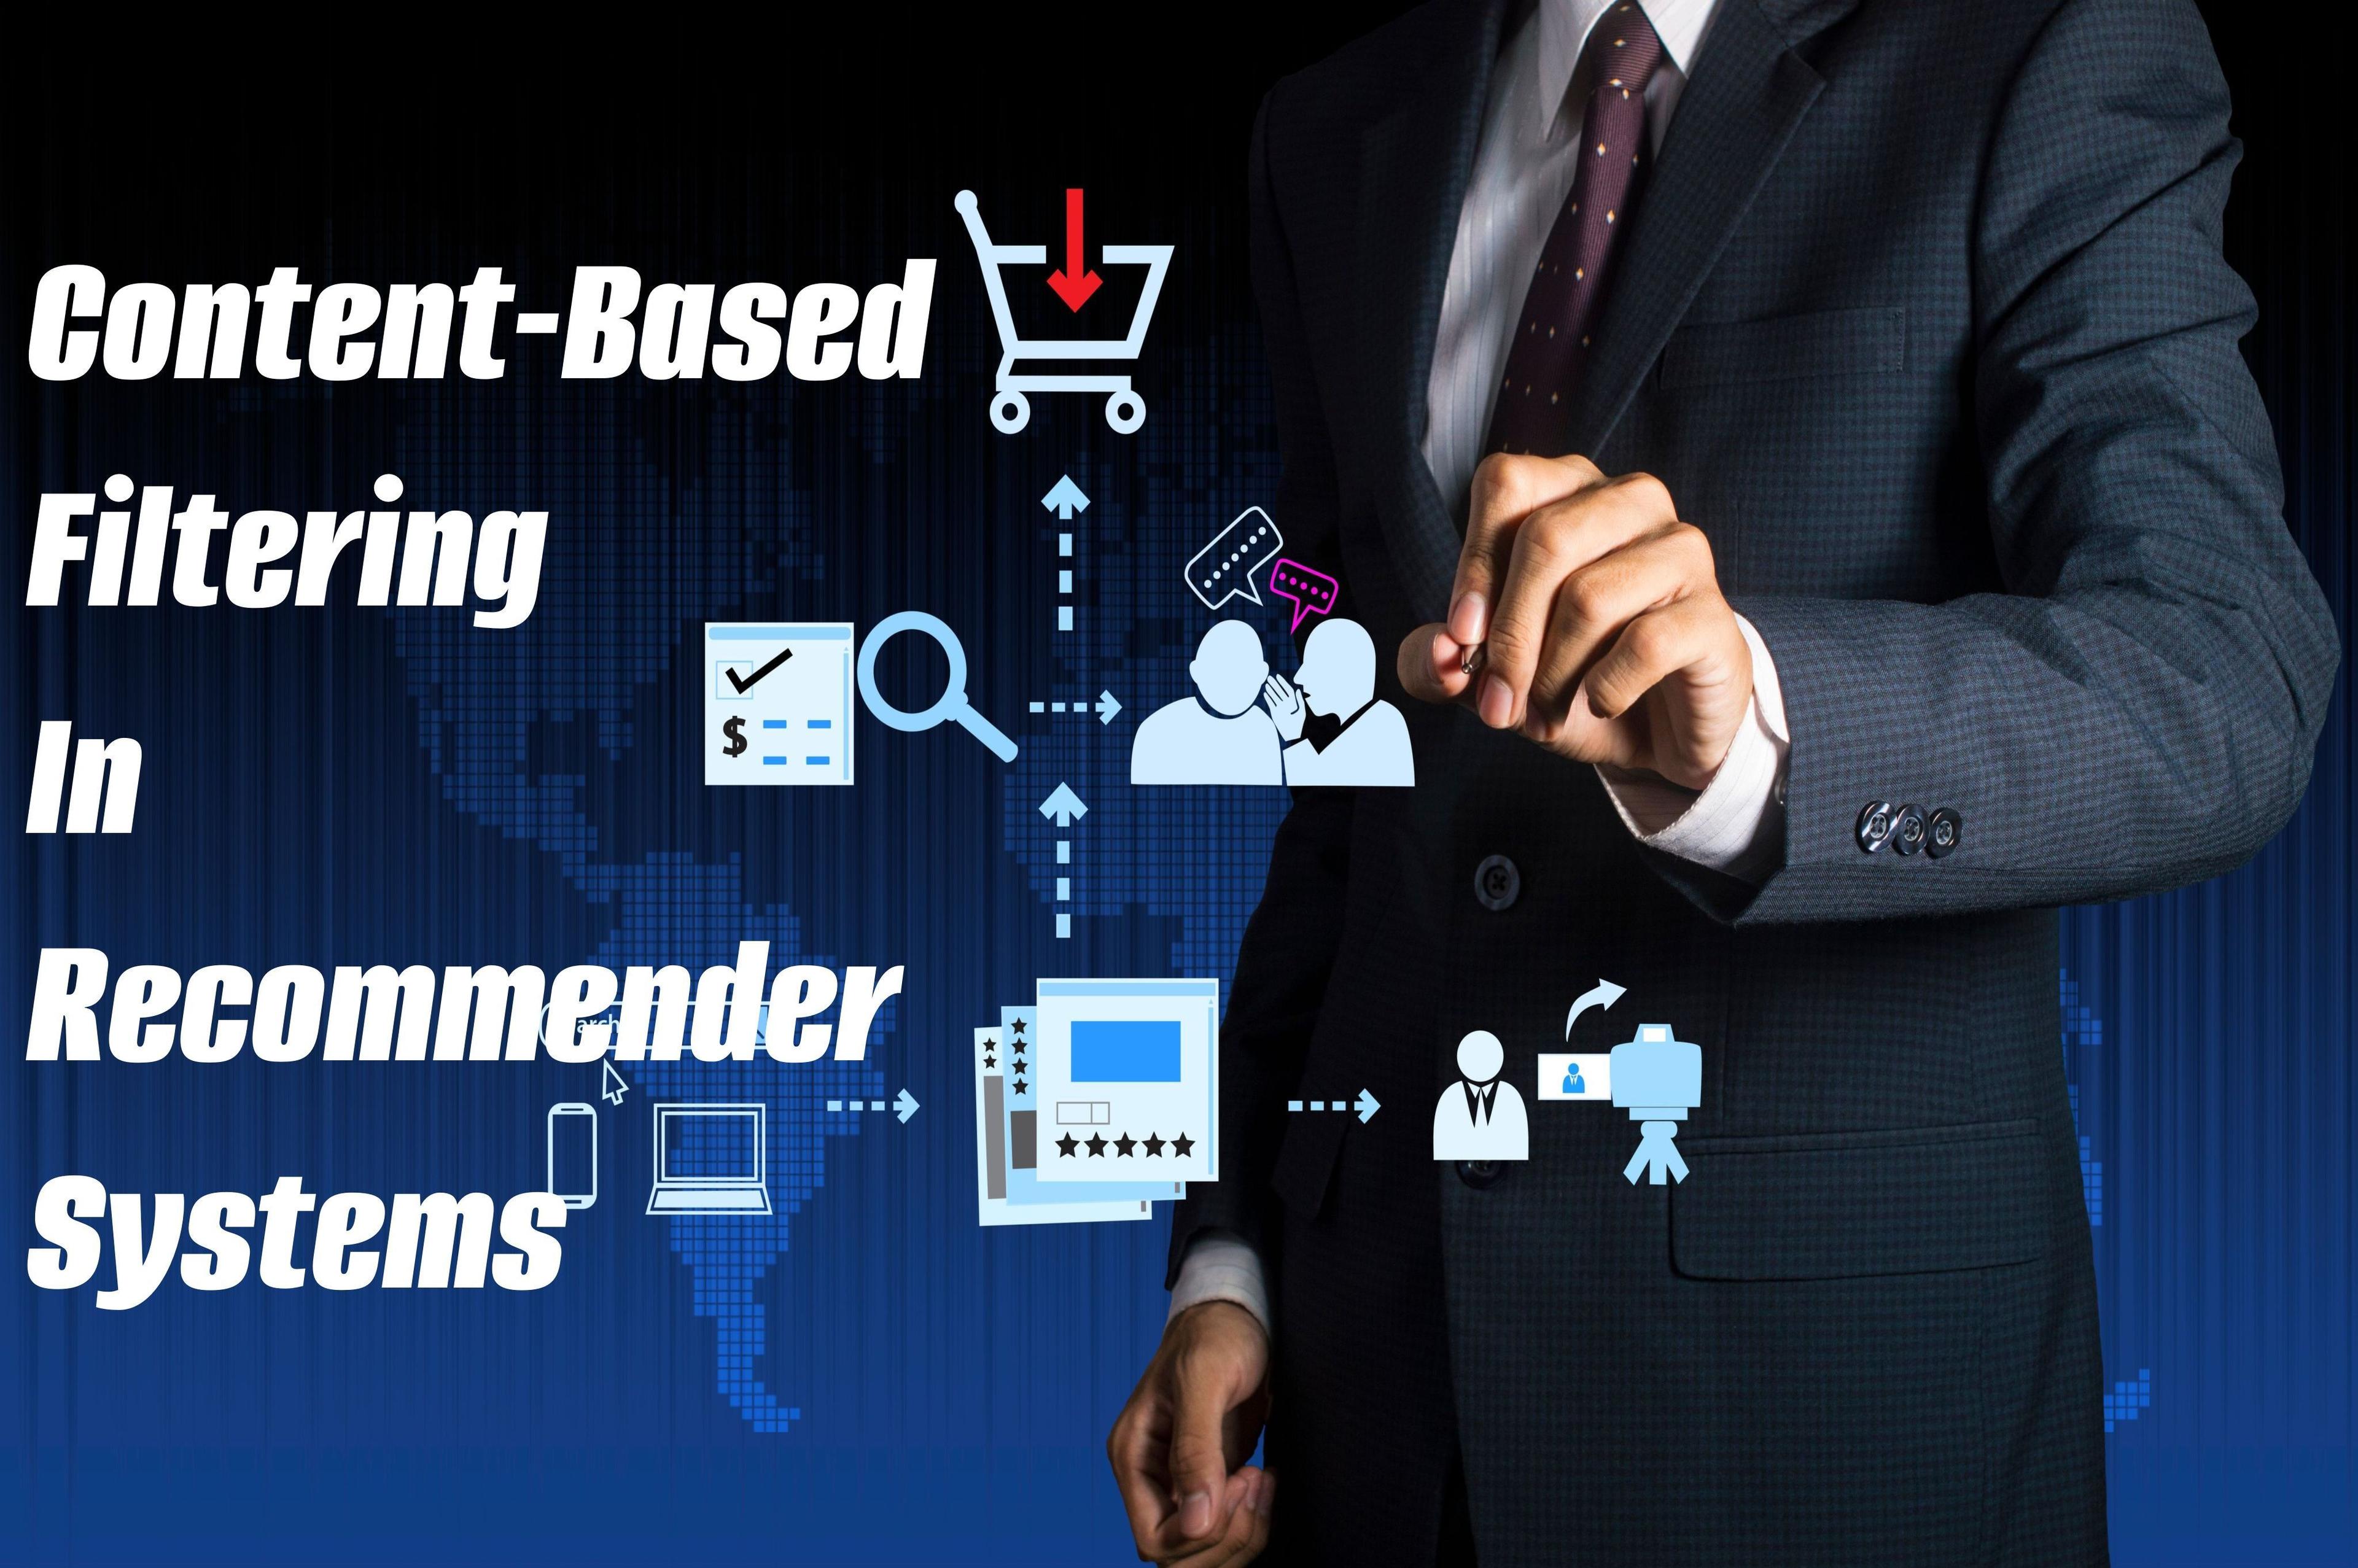 Content Based Filtering in Recommender System